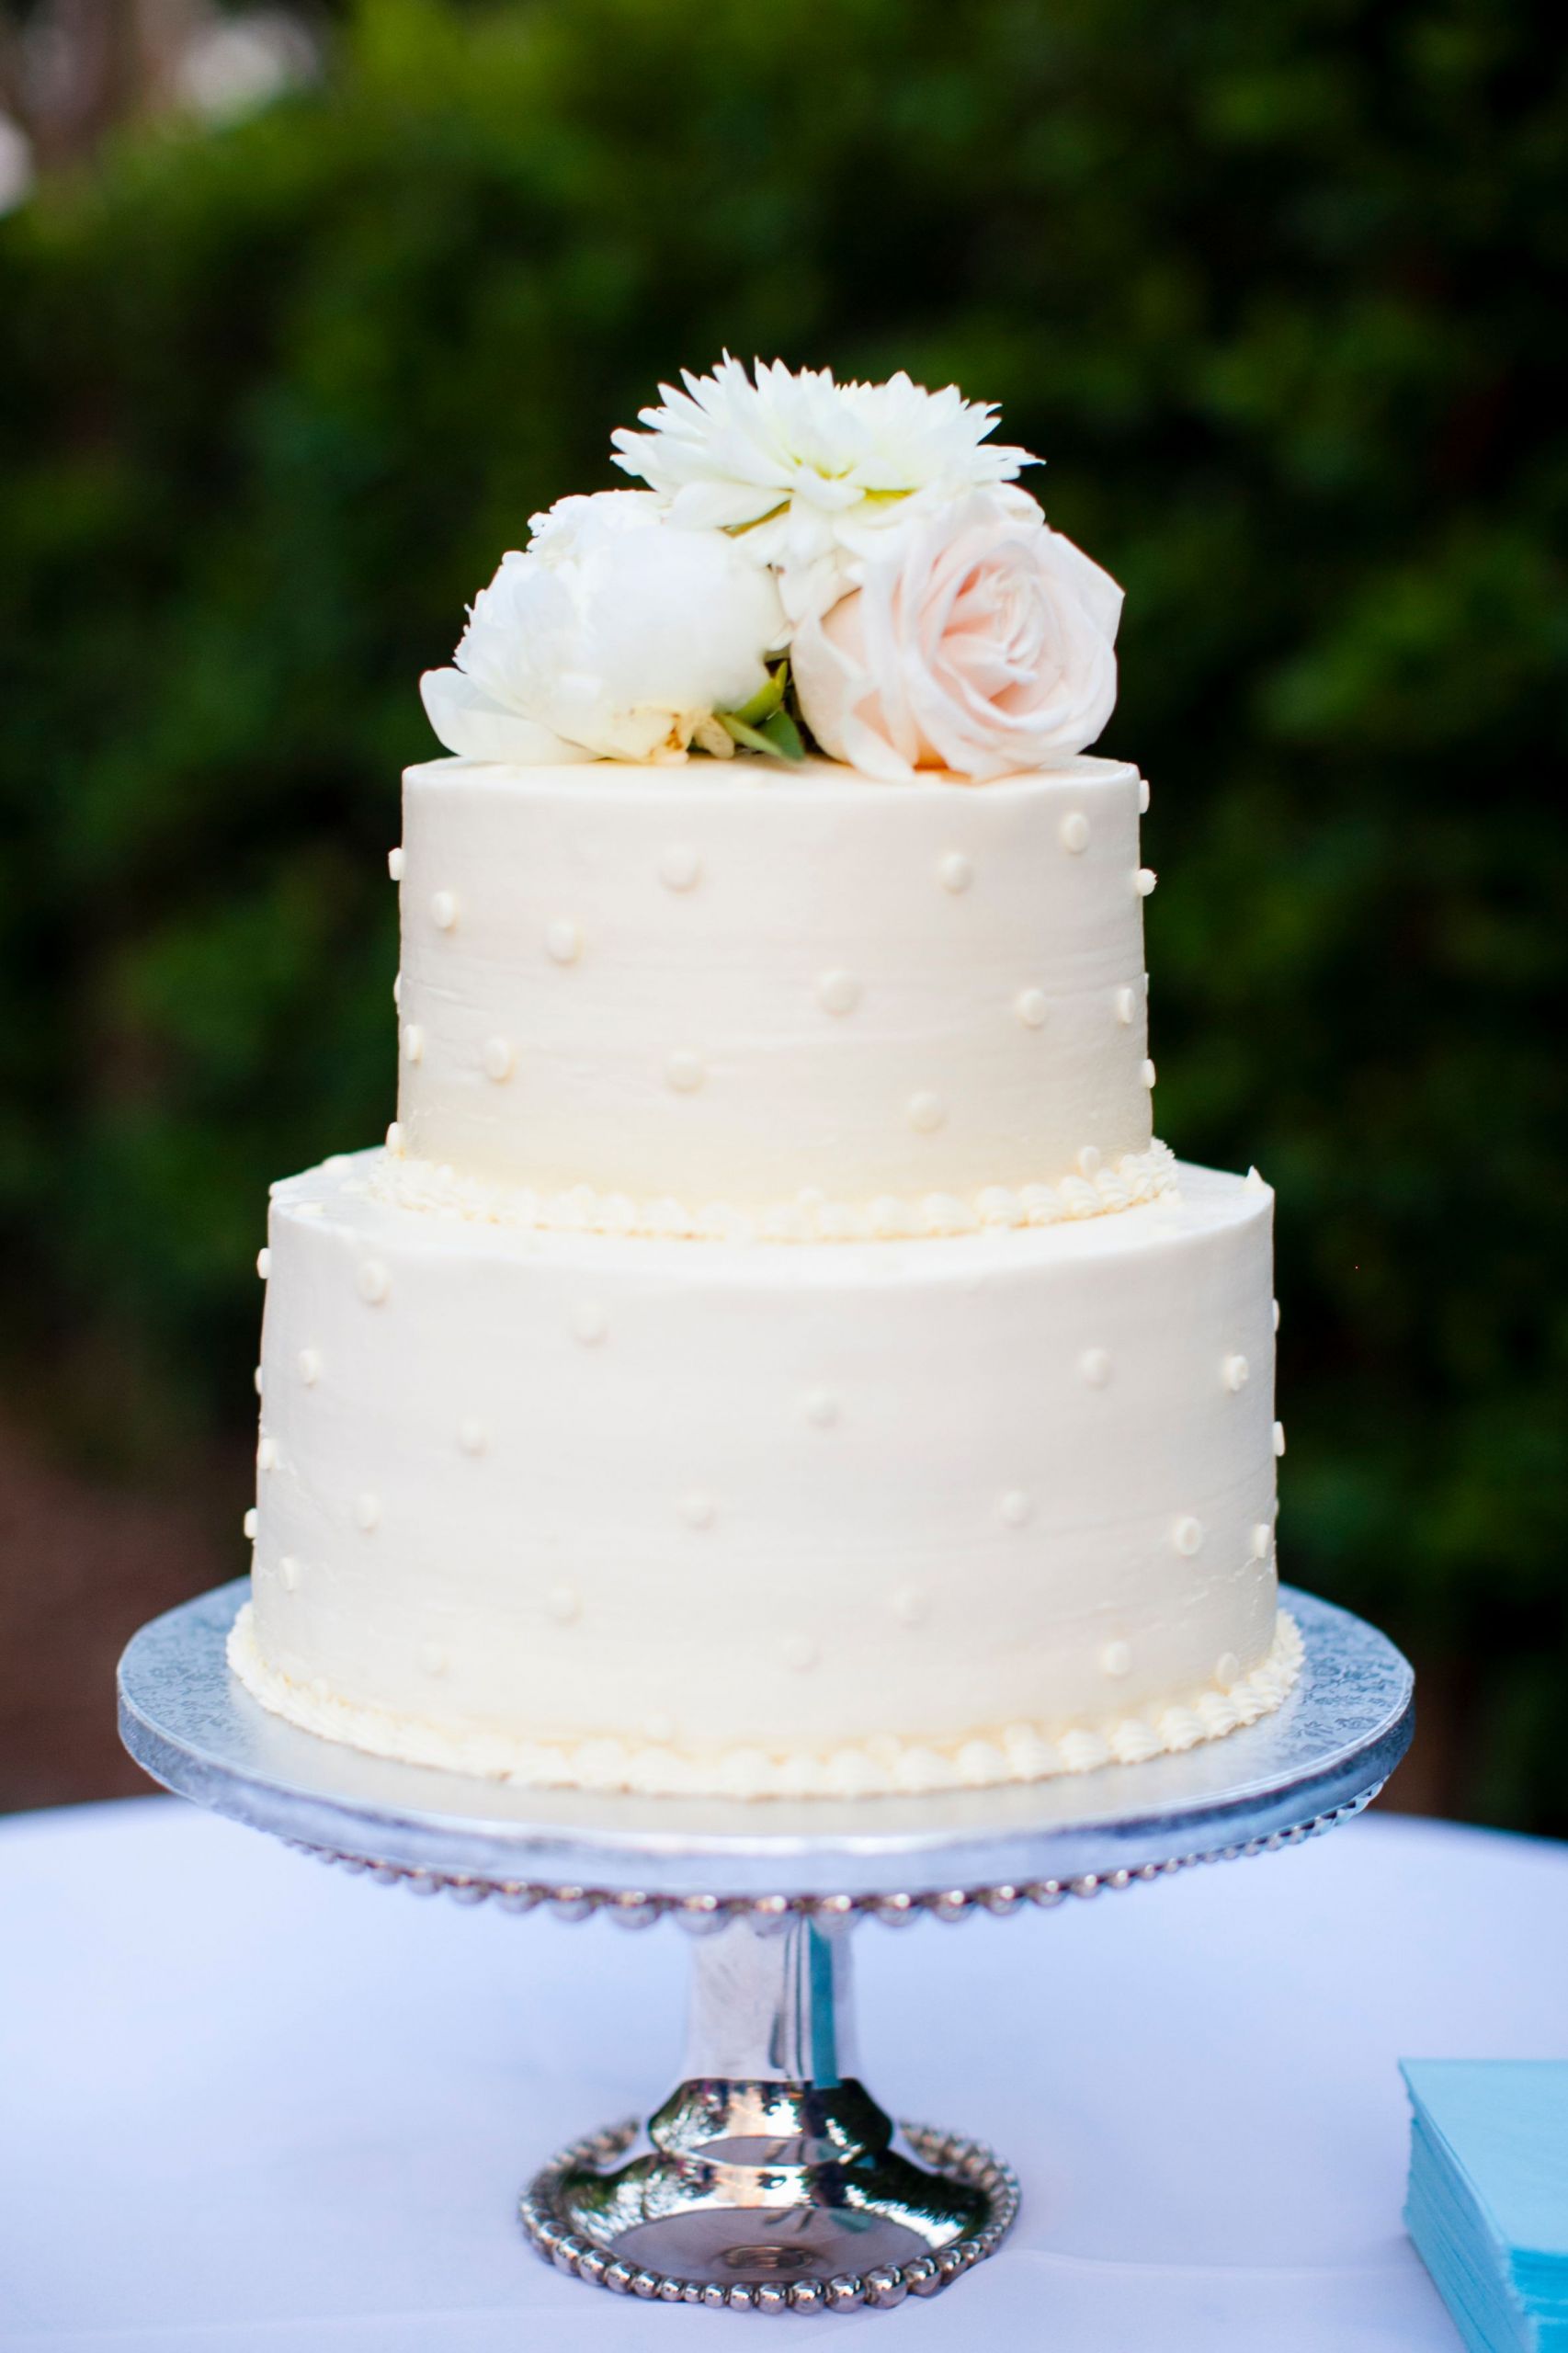 Wedding Cake Recipes For Tiered Cakes
 Two Tier Polka Dot Buttercream Wedding Cake